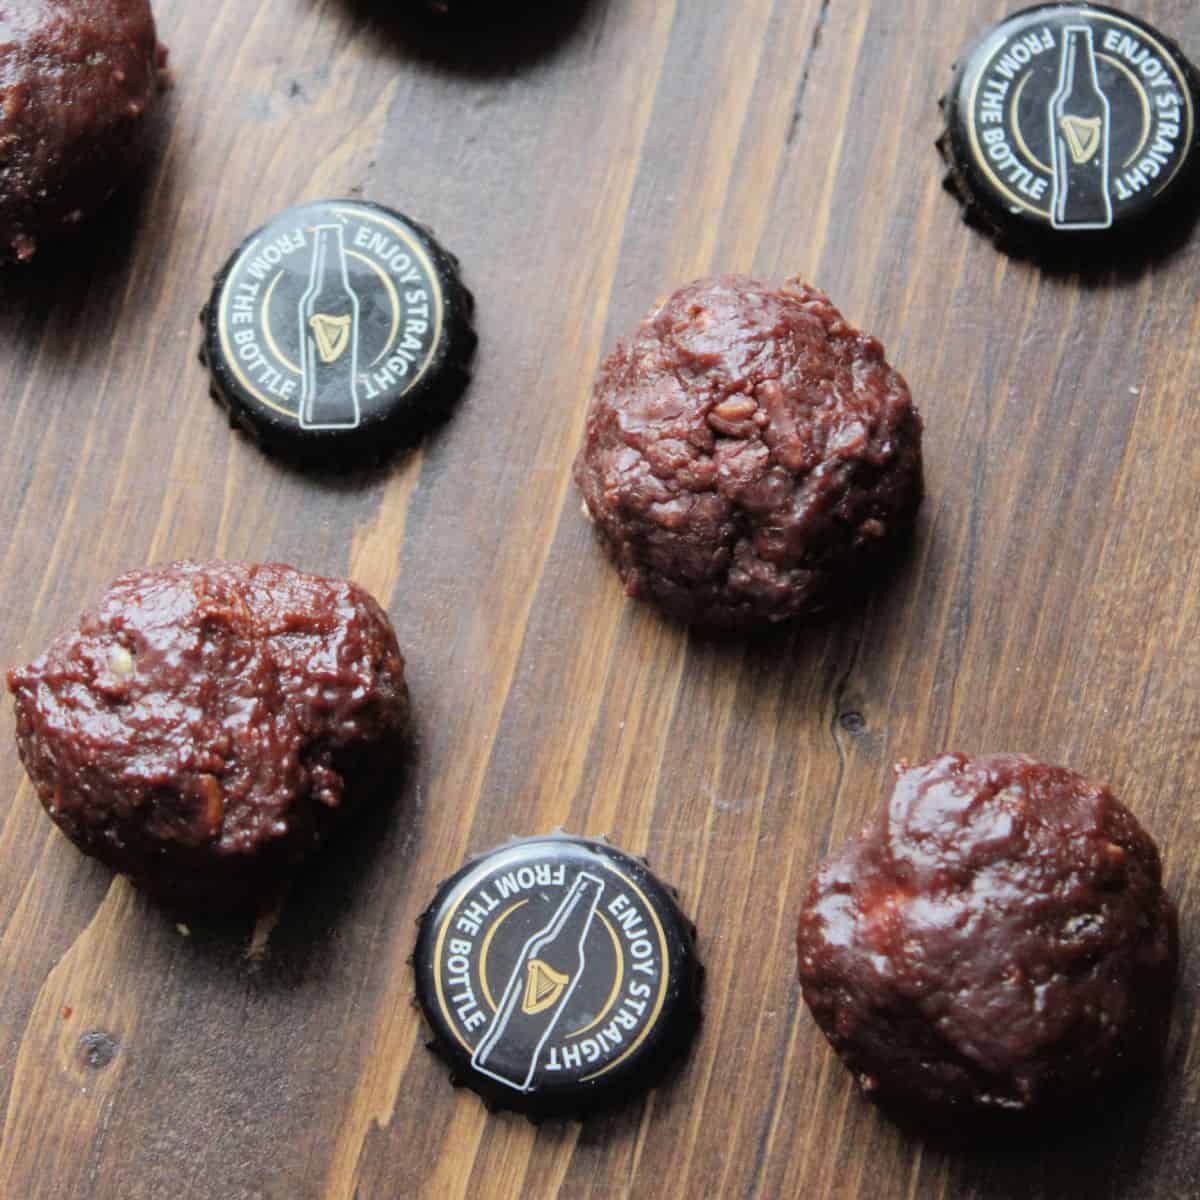 Guinness Chocolate balls and Guinness beer bottle lids